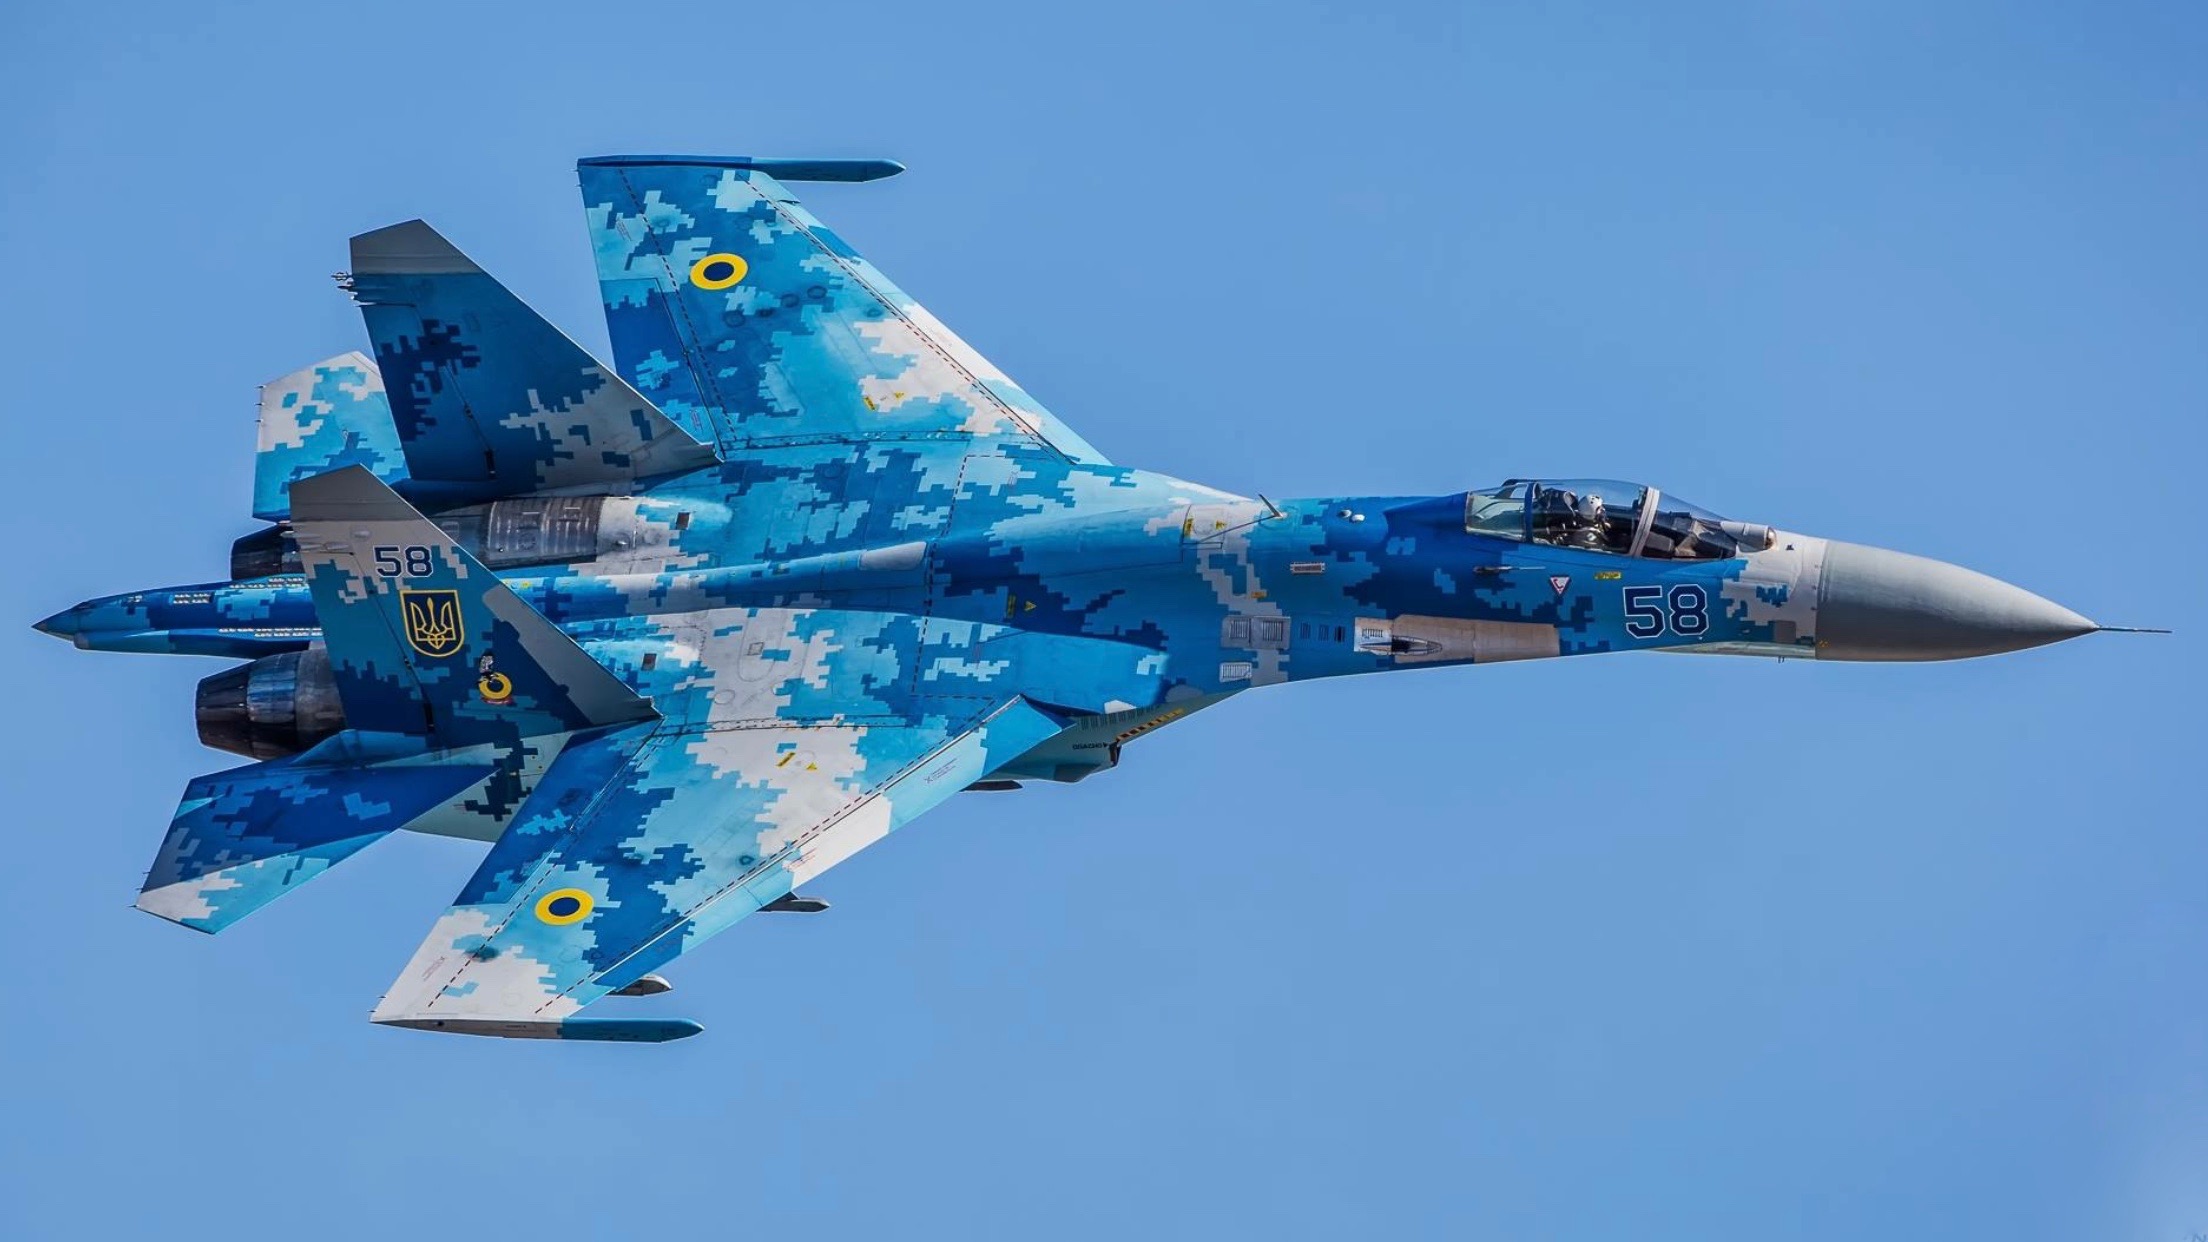 Capabilities Of The Su 27sm2 Sm3 The Heavily Enhanced Flanker Forming The Backbone Of Russia S Fighter Fleet